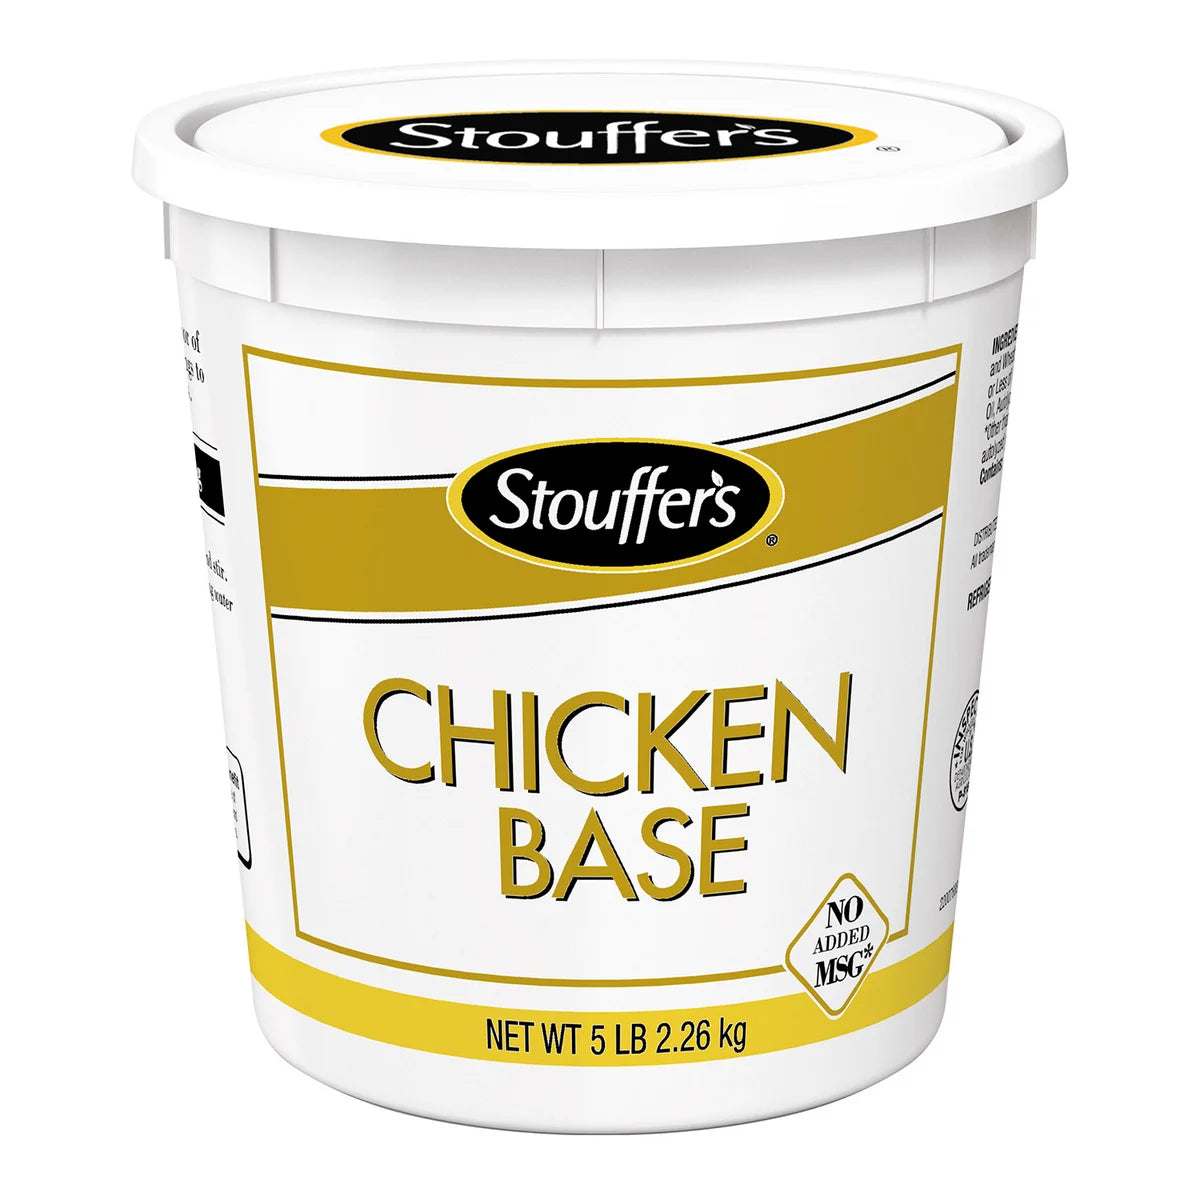 Stouffer's Chicken Base (no added MSG) - 5 lb